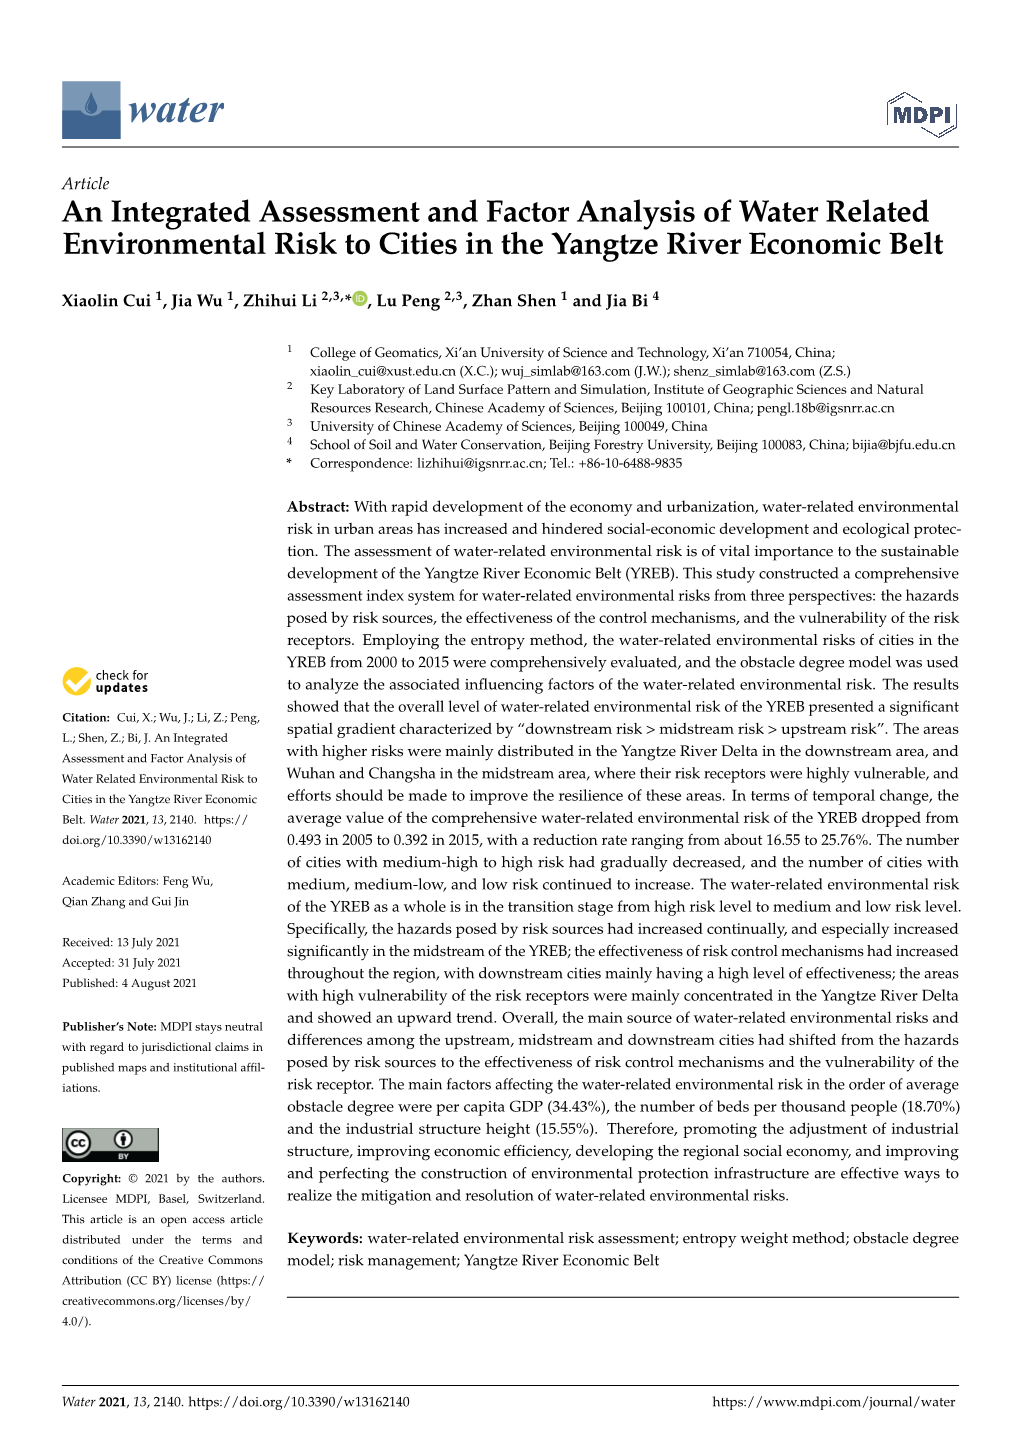 An Integrated Assessment and Factor Analysis of Water Related Environmental Risk to Cities in the Yangtze River Economic Belt